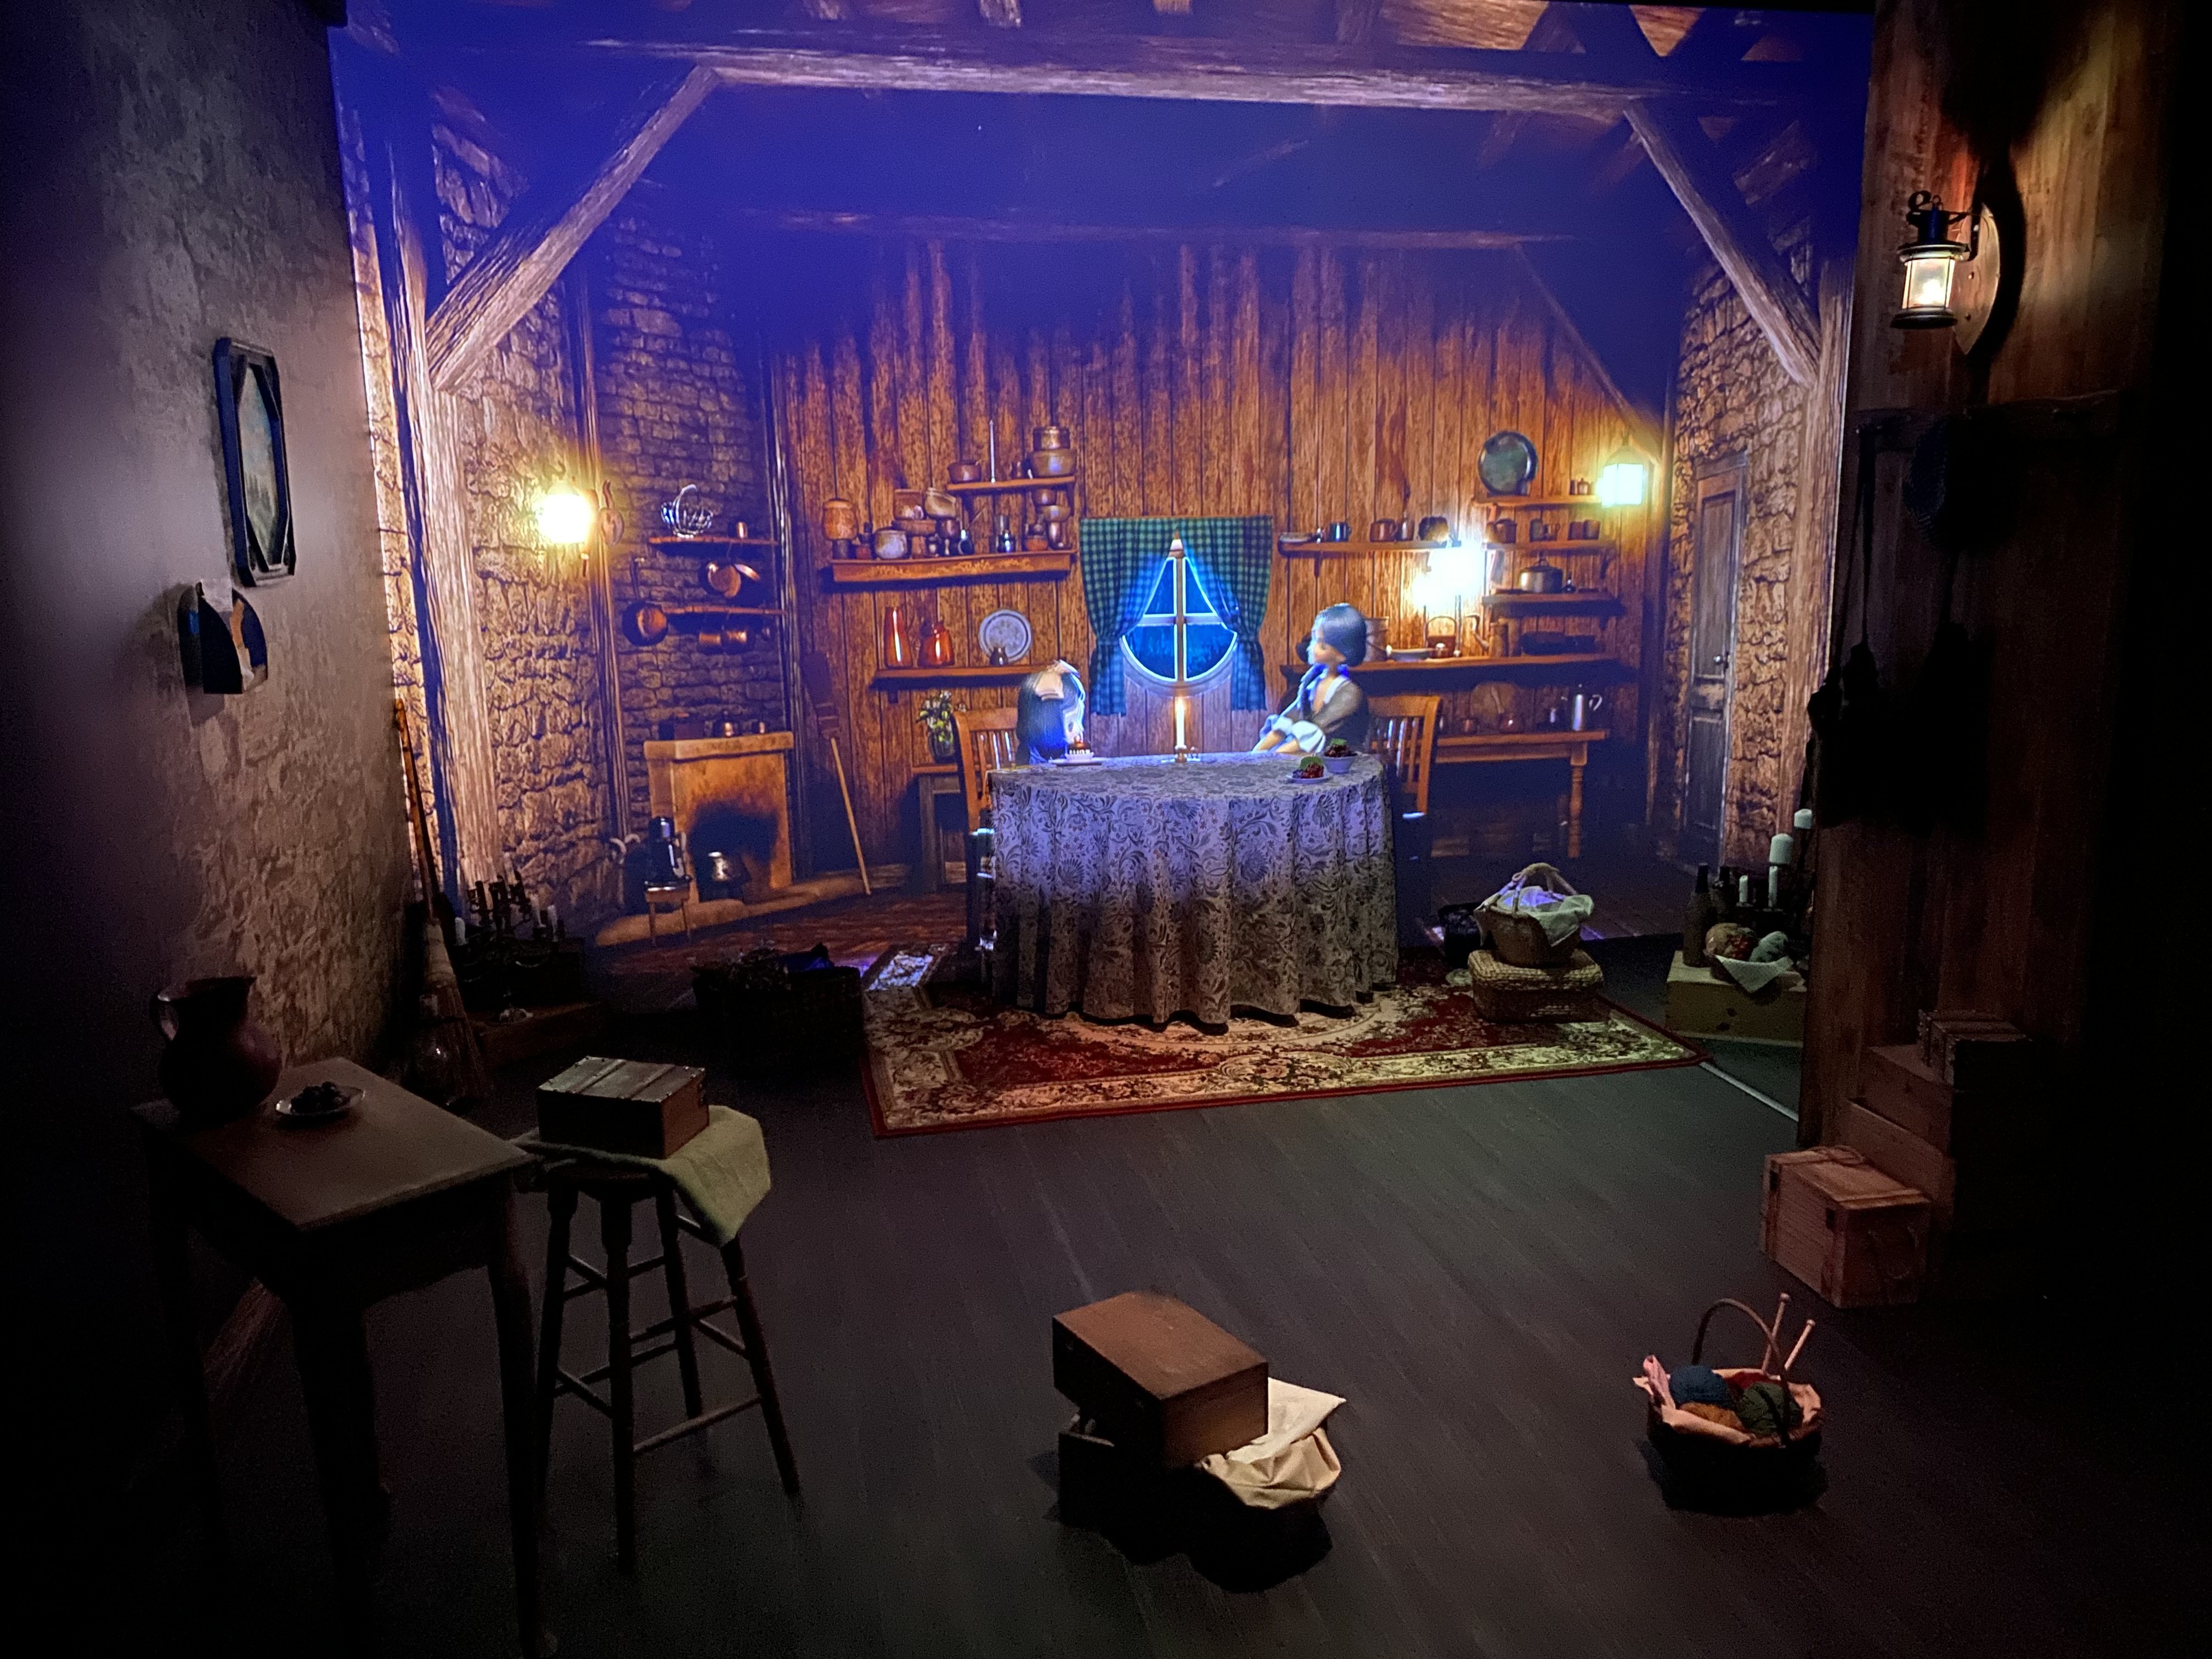 The Brothers’ Grimm tale of Hansel and Gretel is recreated as a walk-through experience that utilises impressive projection mapping at the Immersive Fort Tokyo. Photo: Julian Ryall